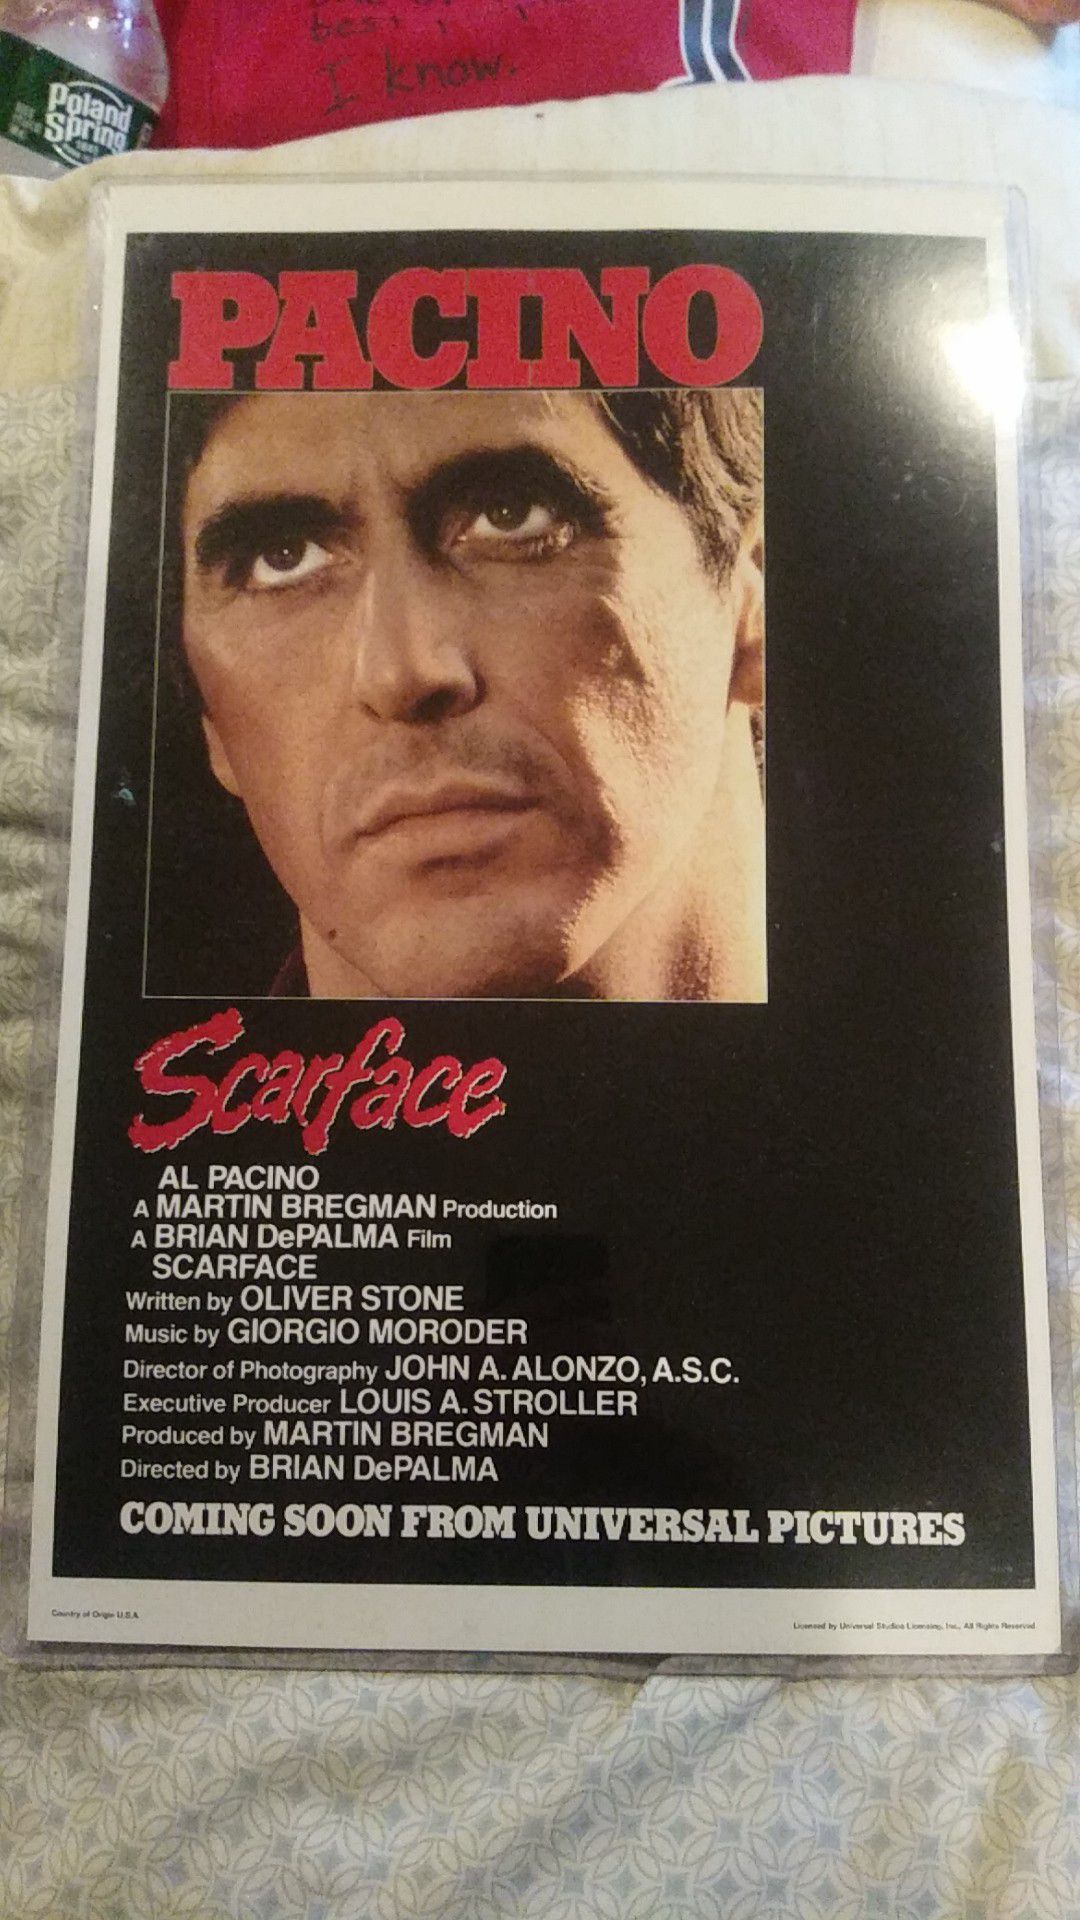 Scarface poster in hard plastic